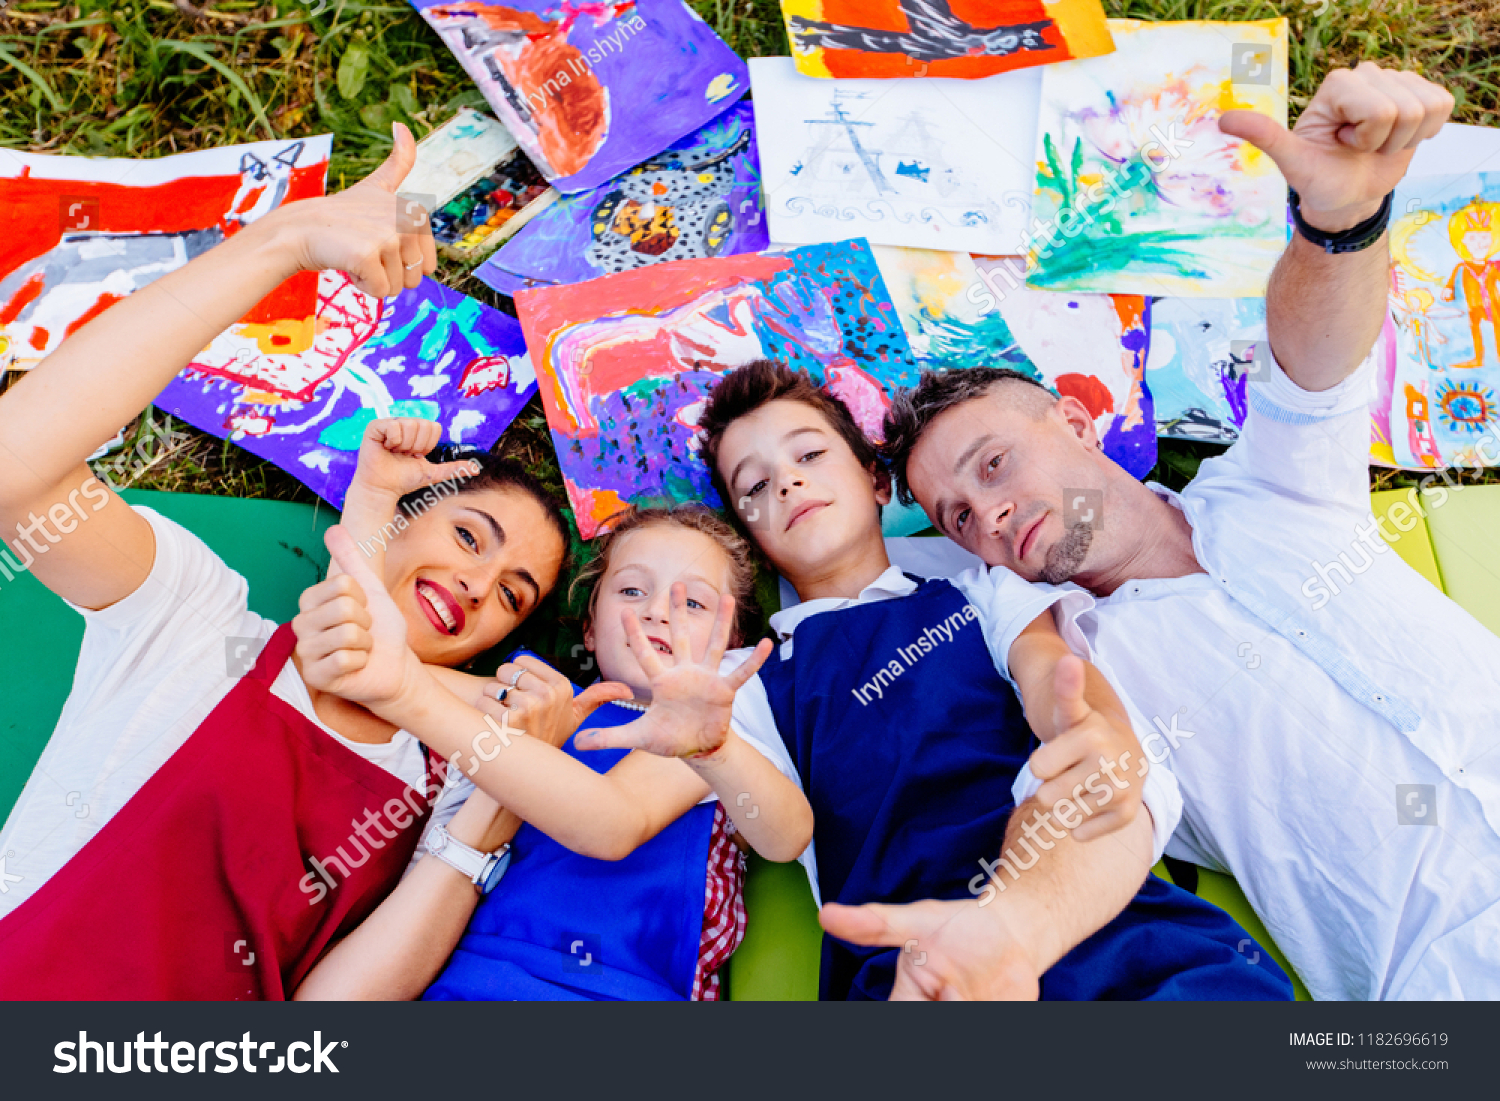 Smiling creative family paitners of mother, father, and two children in aprons lying down on grass with drawings outside having fun with thumbs up outstrectched to the camera. #1182696619